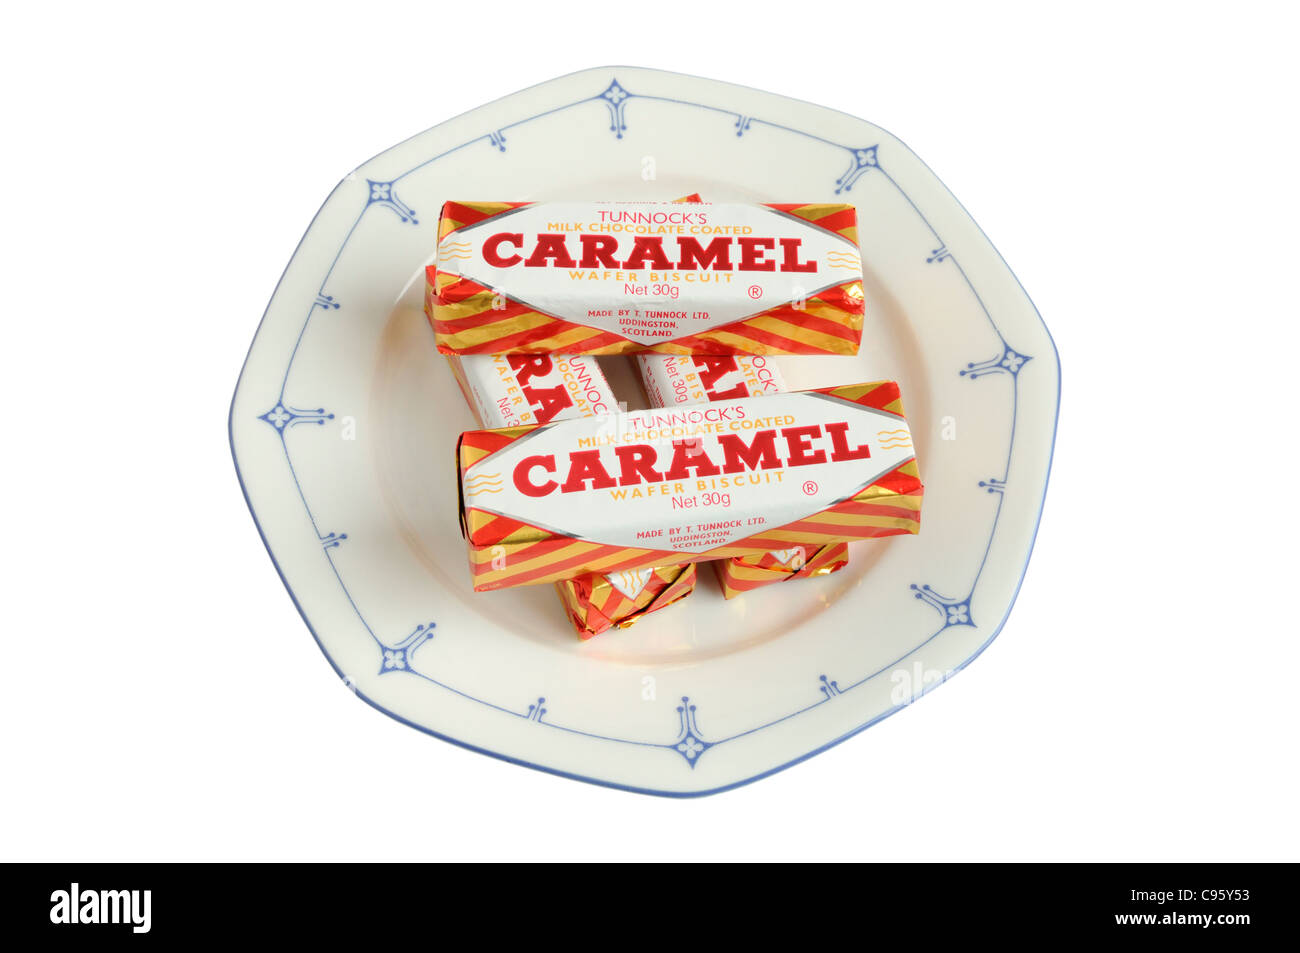 Tunnock's caramel wafer biscuits on a plate Stock Photo